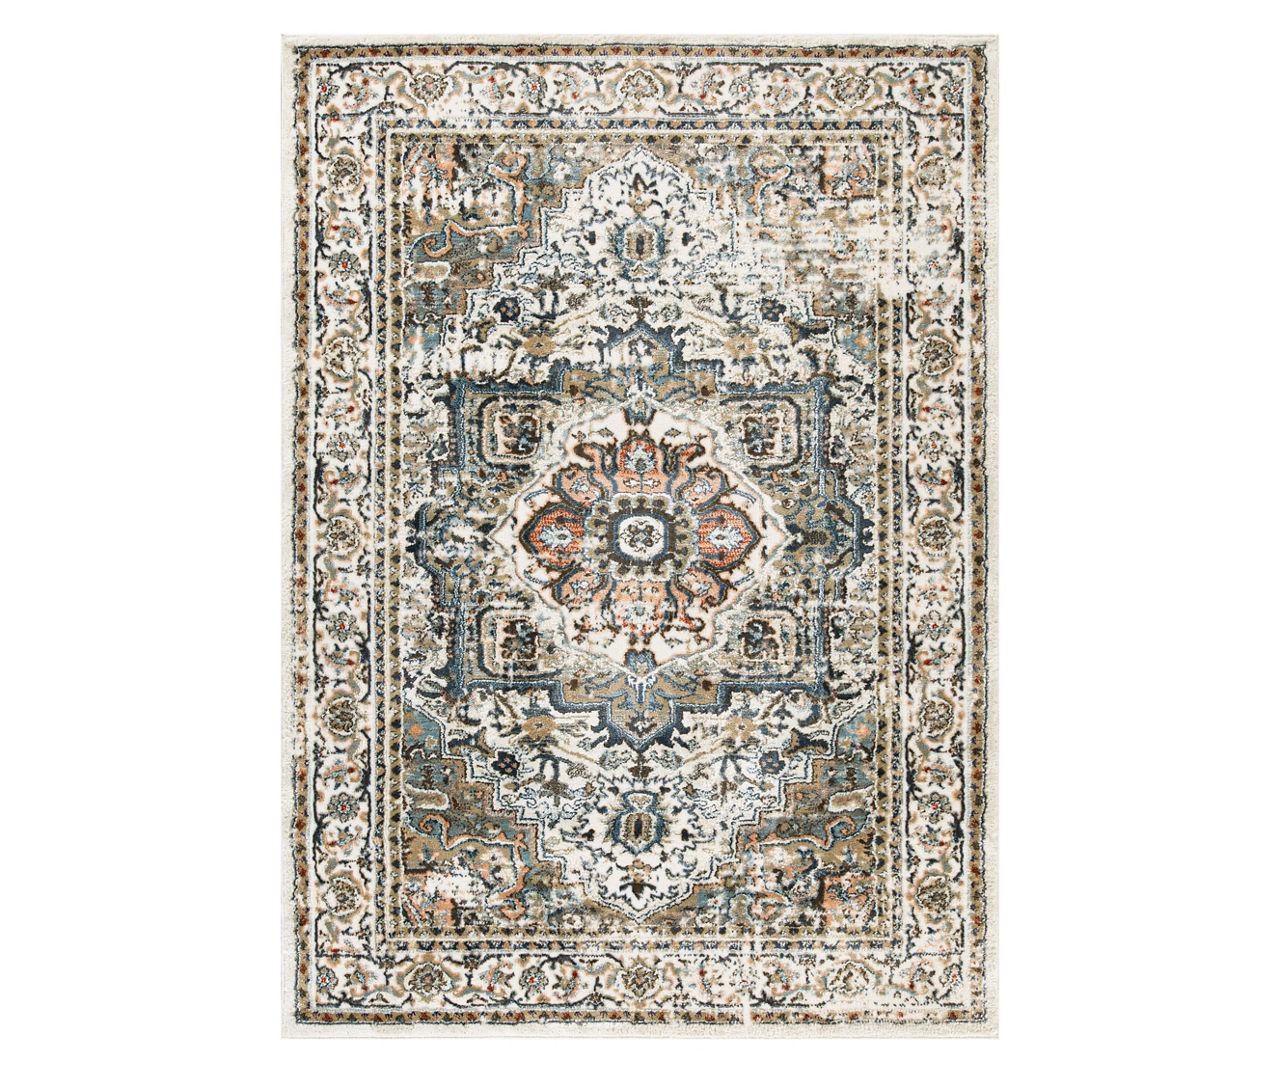 Shop Our Indoor Area Rugs, Outdoor Rugs & More